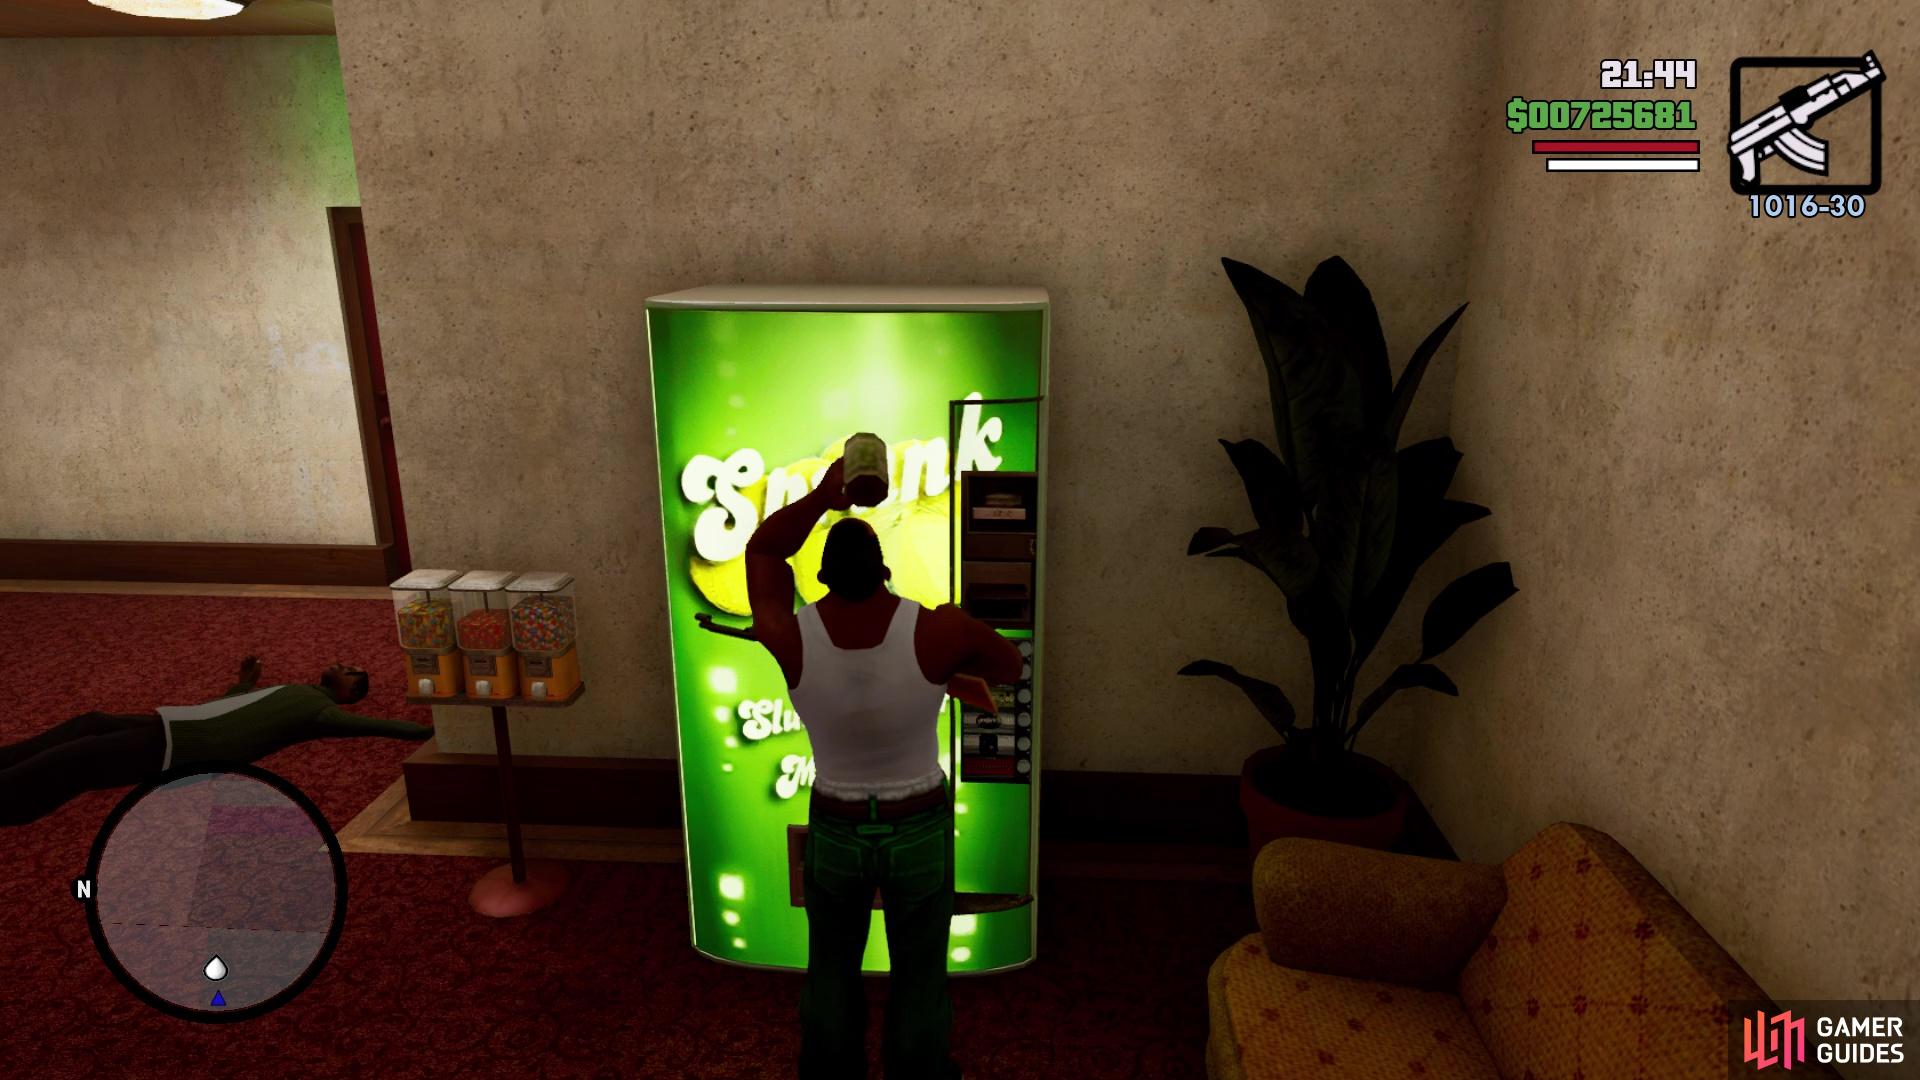 You can recover health with the soda machine in the lobby